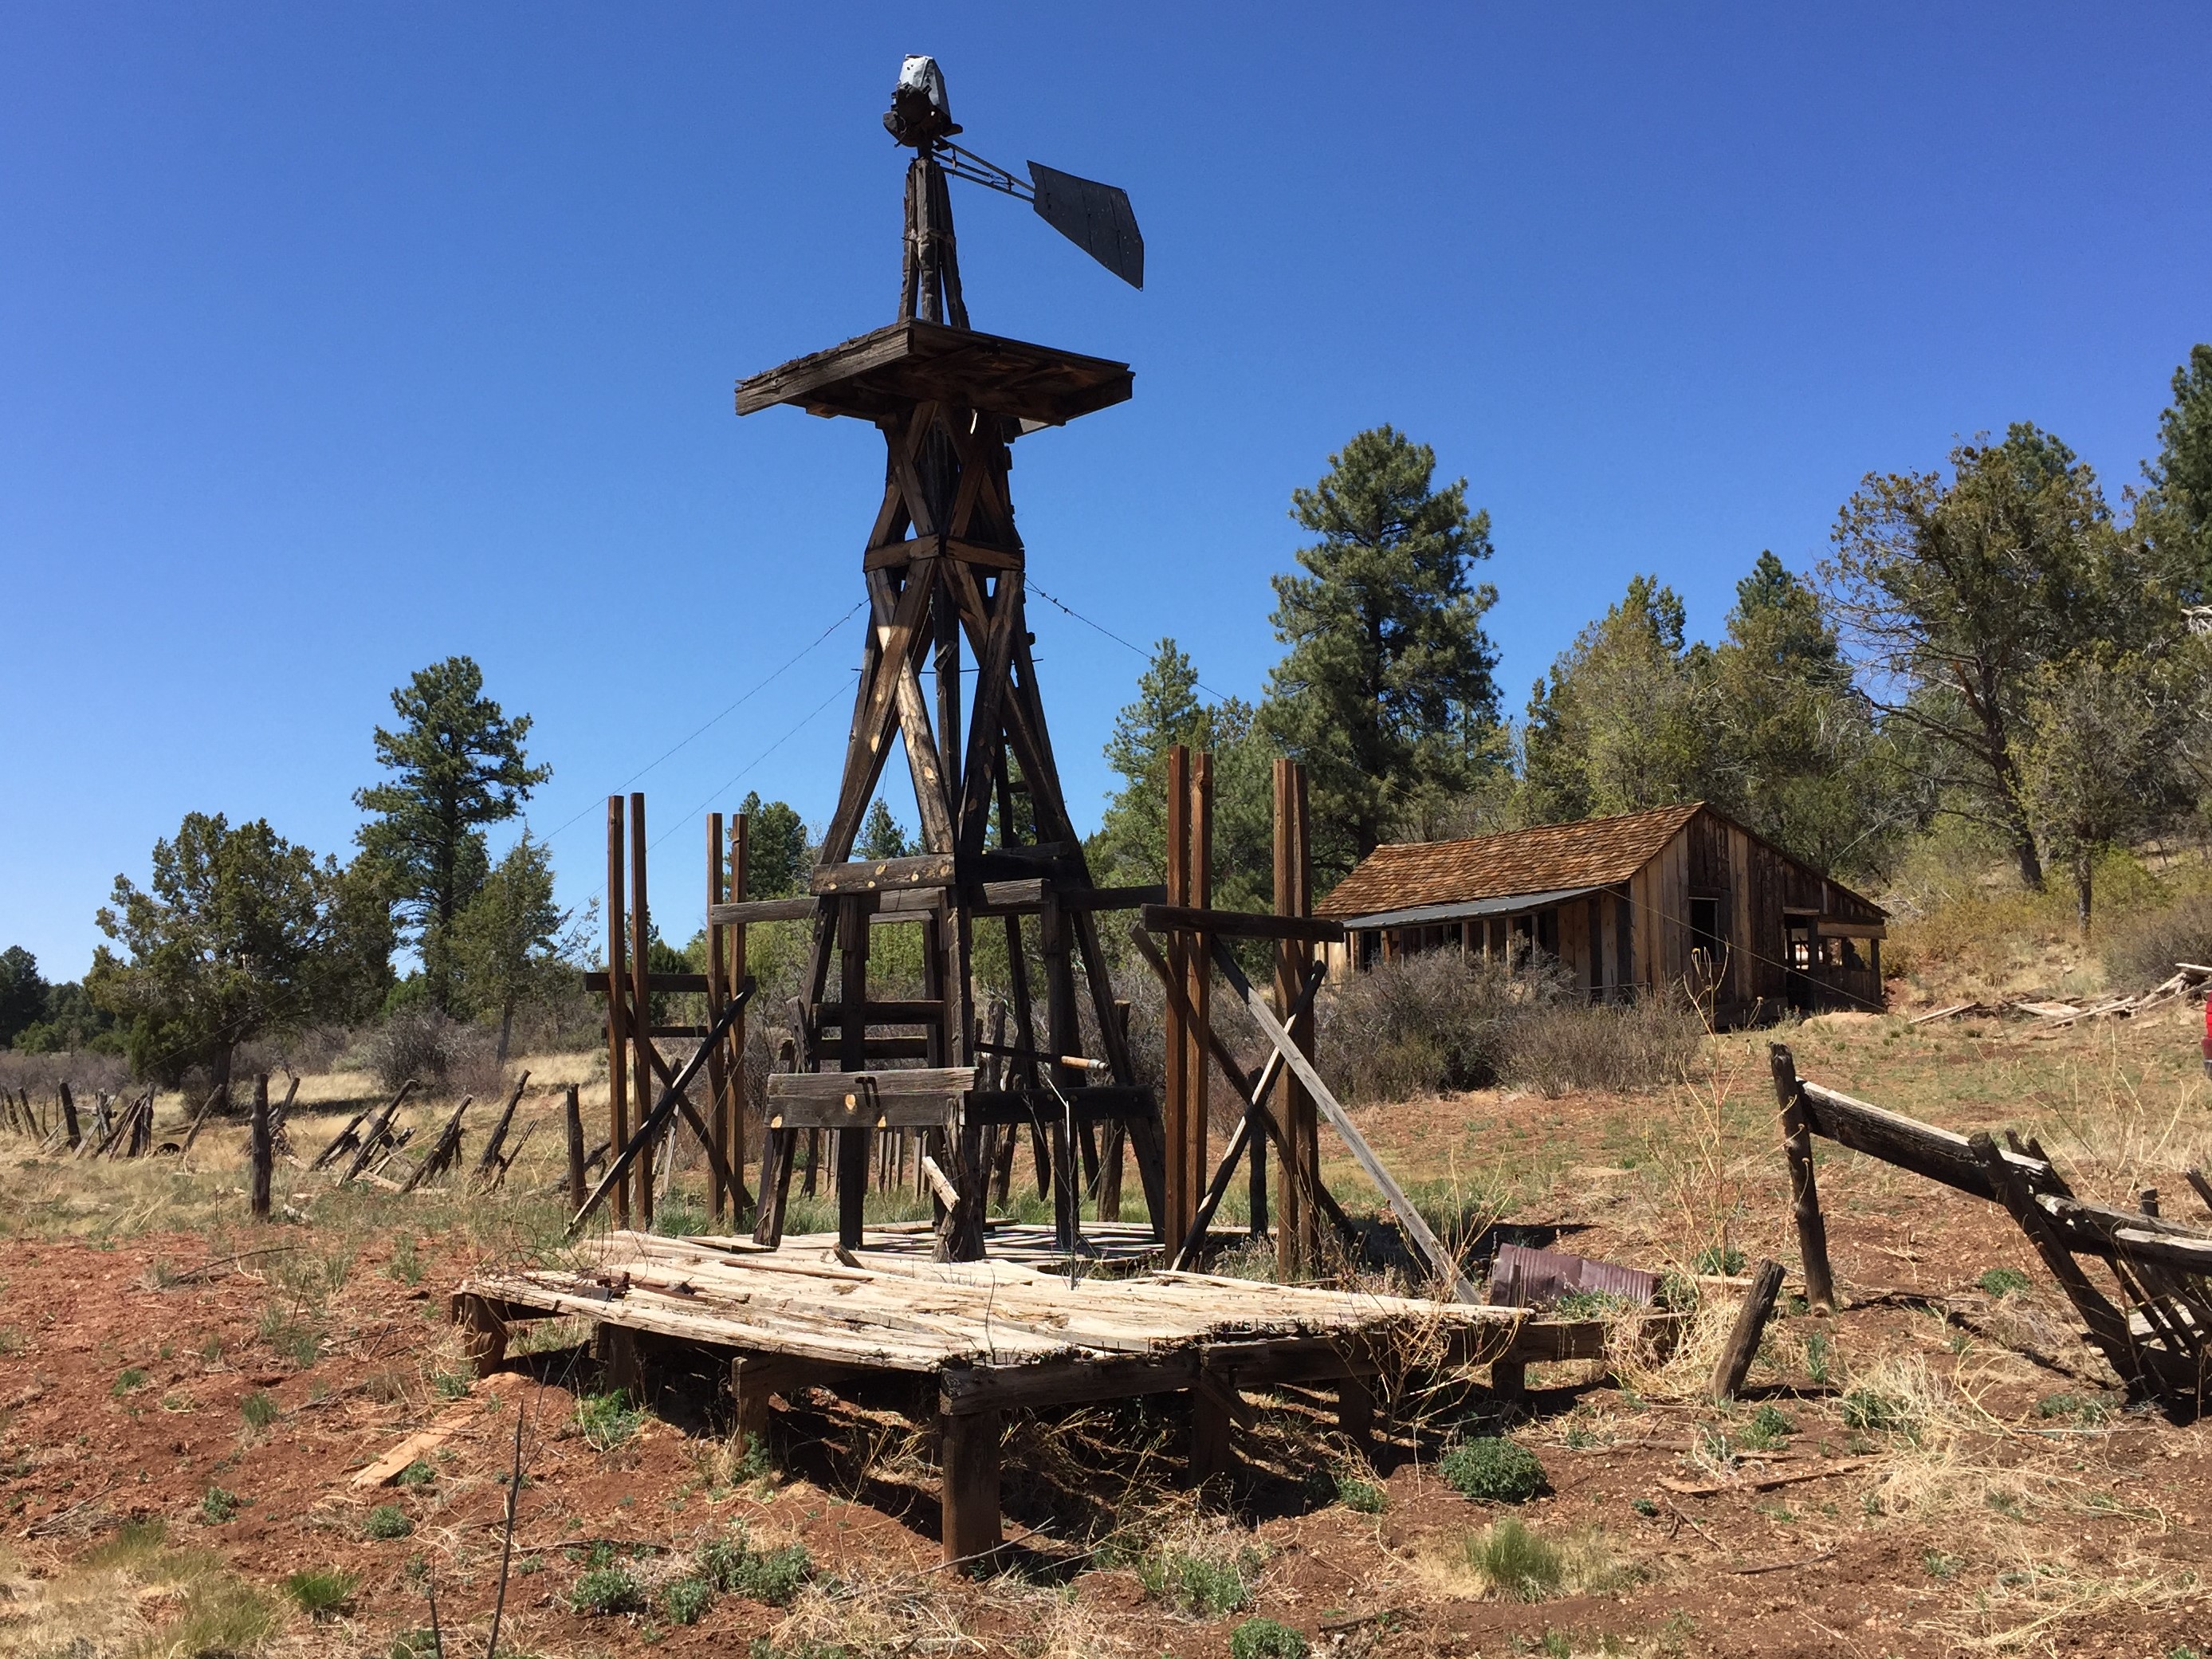 A windmill in front of the Pine Cabin on the Arizona Strip